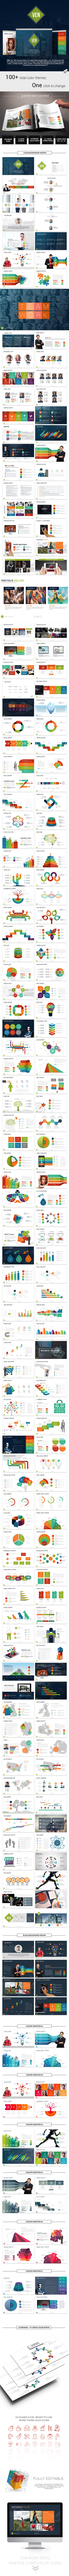 Ven - Complete Powerpoint Template